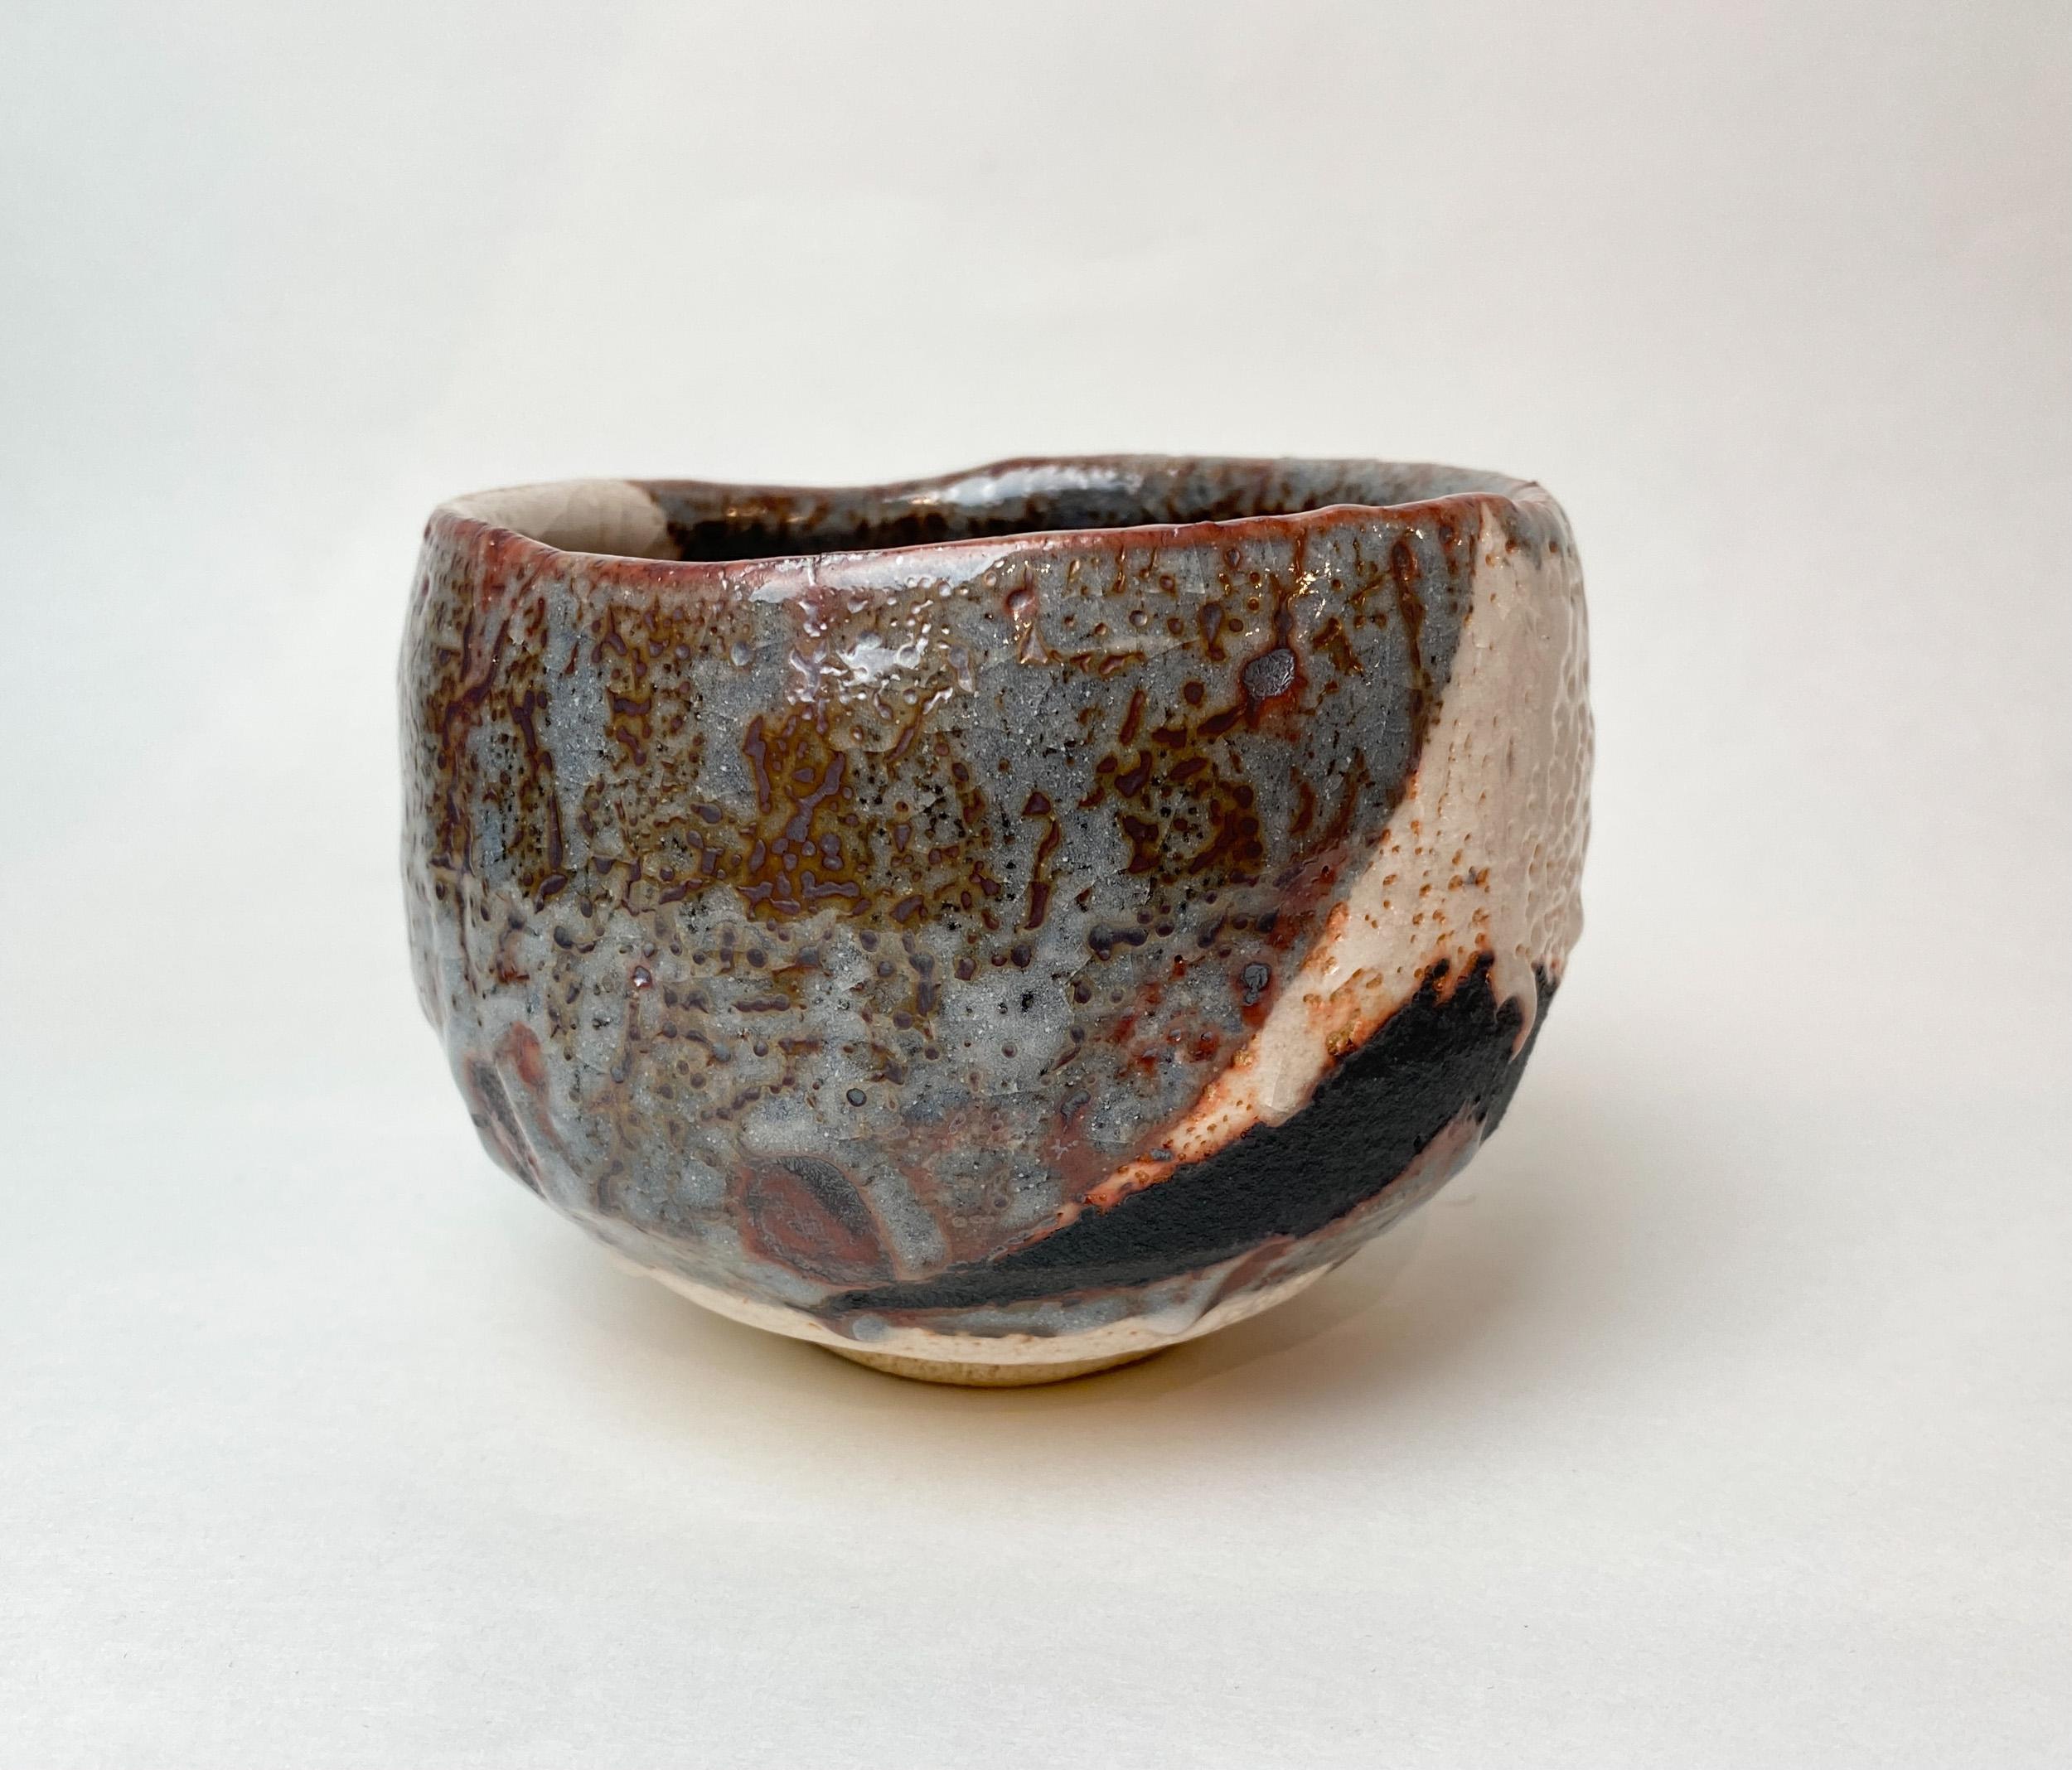 WAKAO TOSHISADA (b. 1933)
Tea Bowl with nezumi-shino glaze, 1998
With signed tomobako
Stoneware
3.625 x 5 x 5 inches 
With artist signed tomobako

Born in Tajimi. After graduating from junior high school, he worked at a ceramics factory while